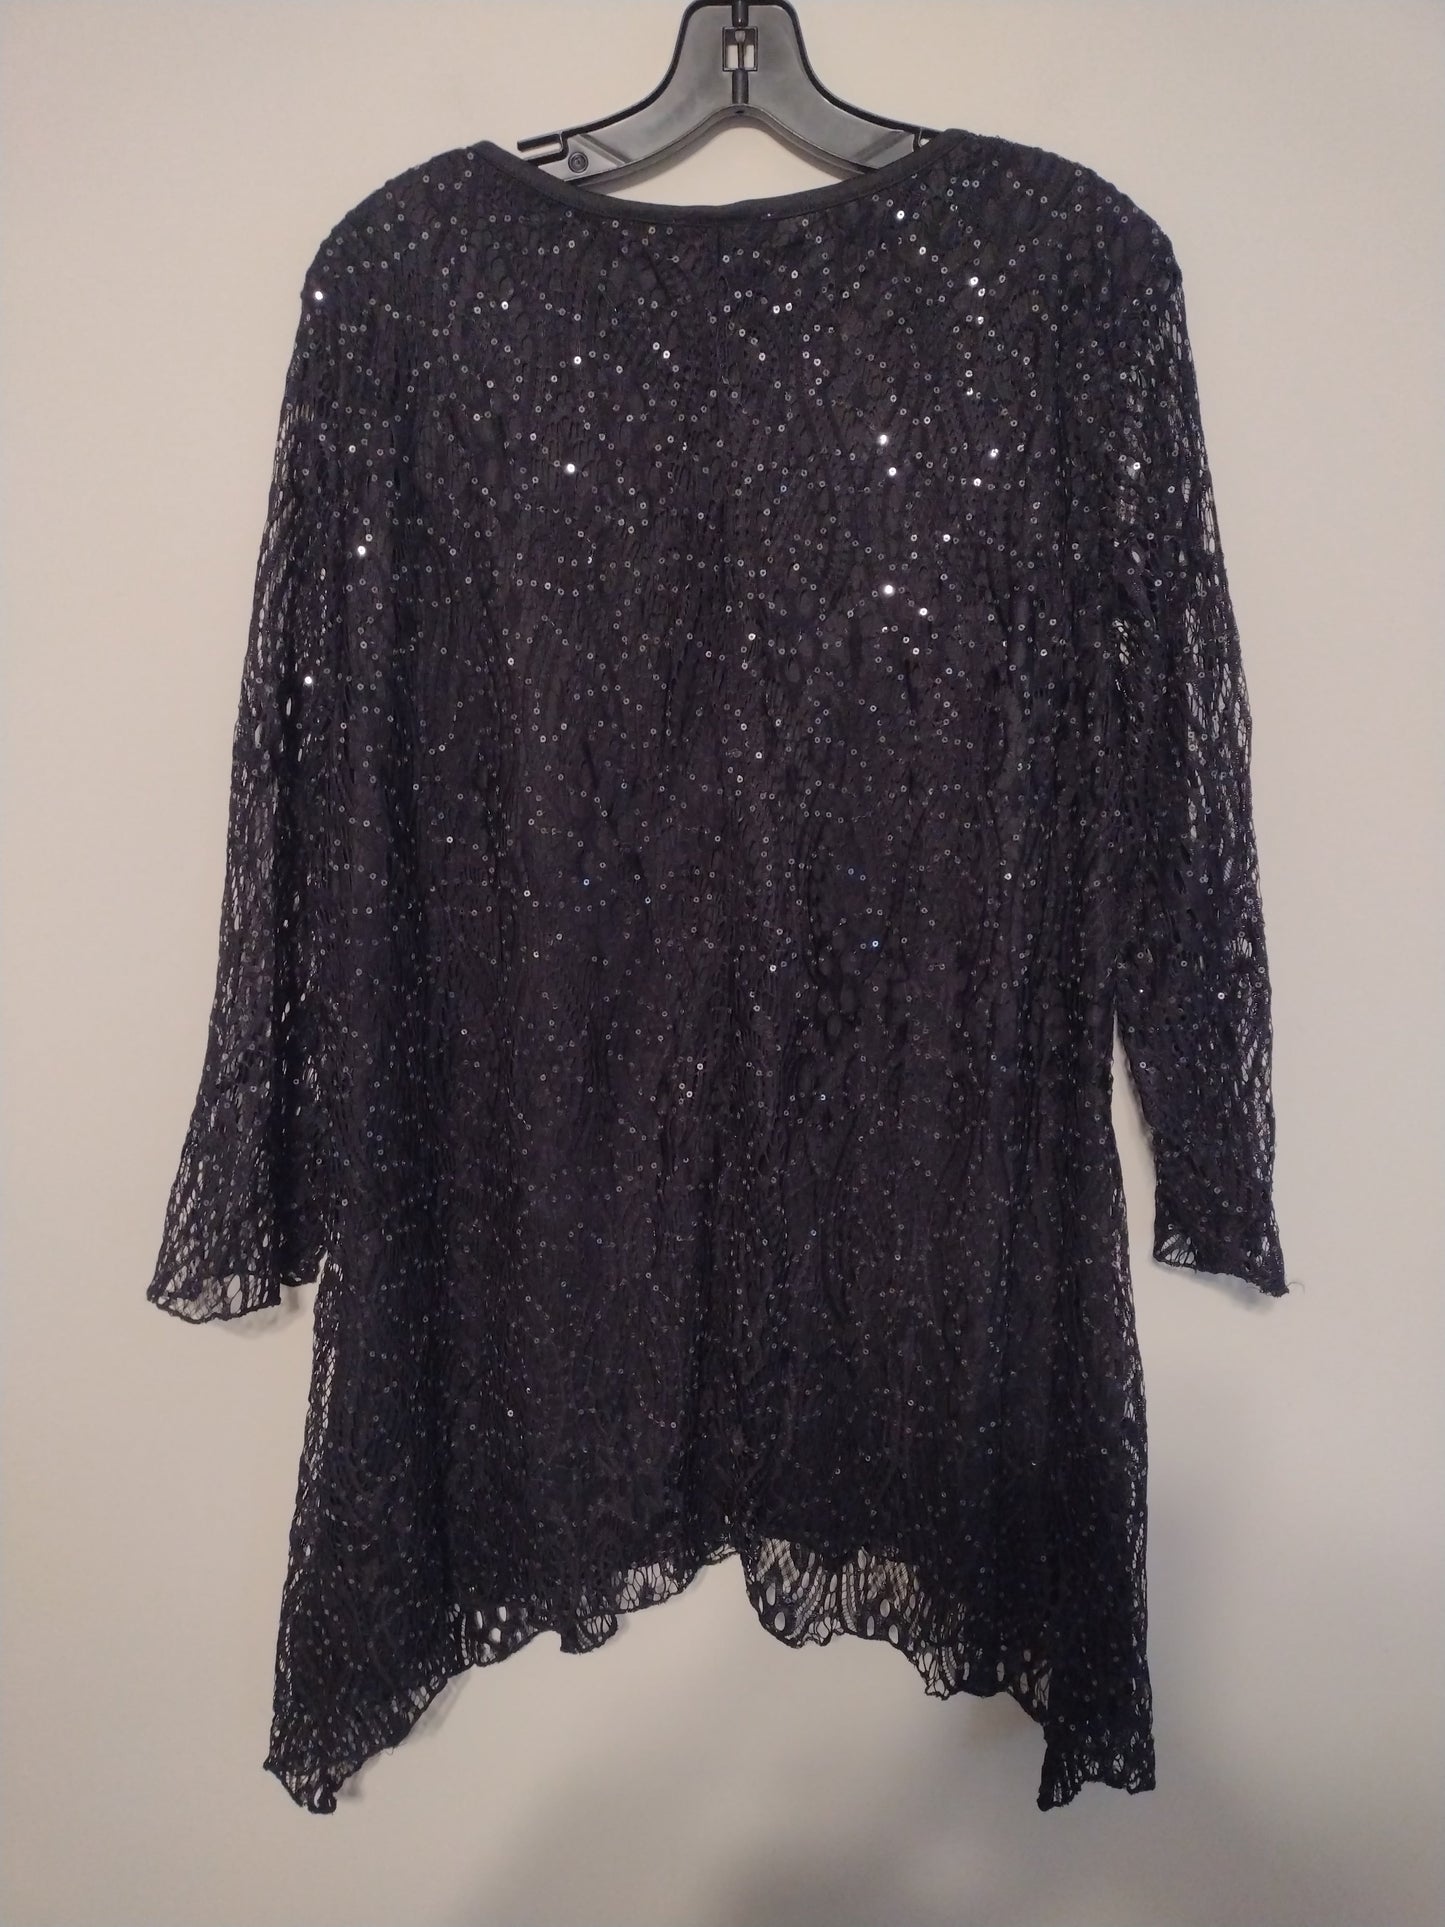 Top Long Sleeve By Brittany Black  Size: 2x